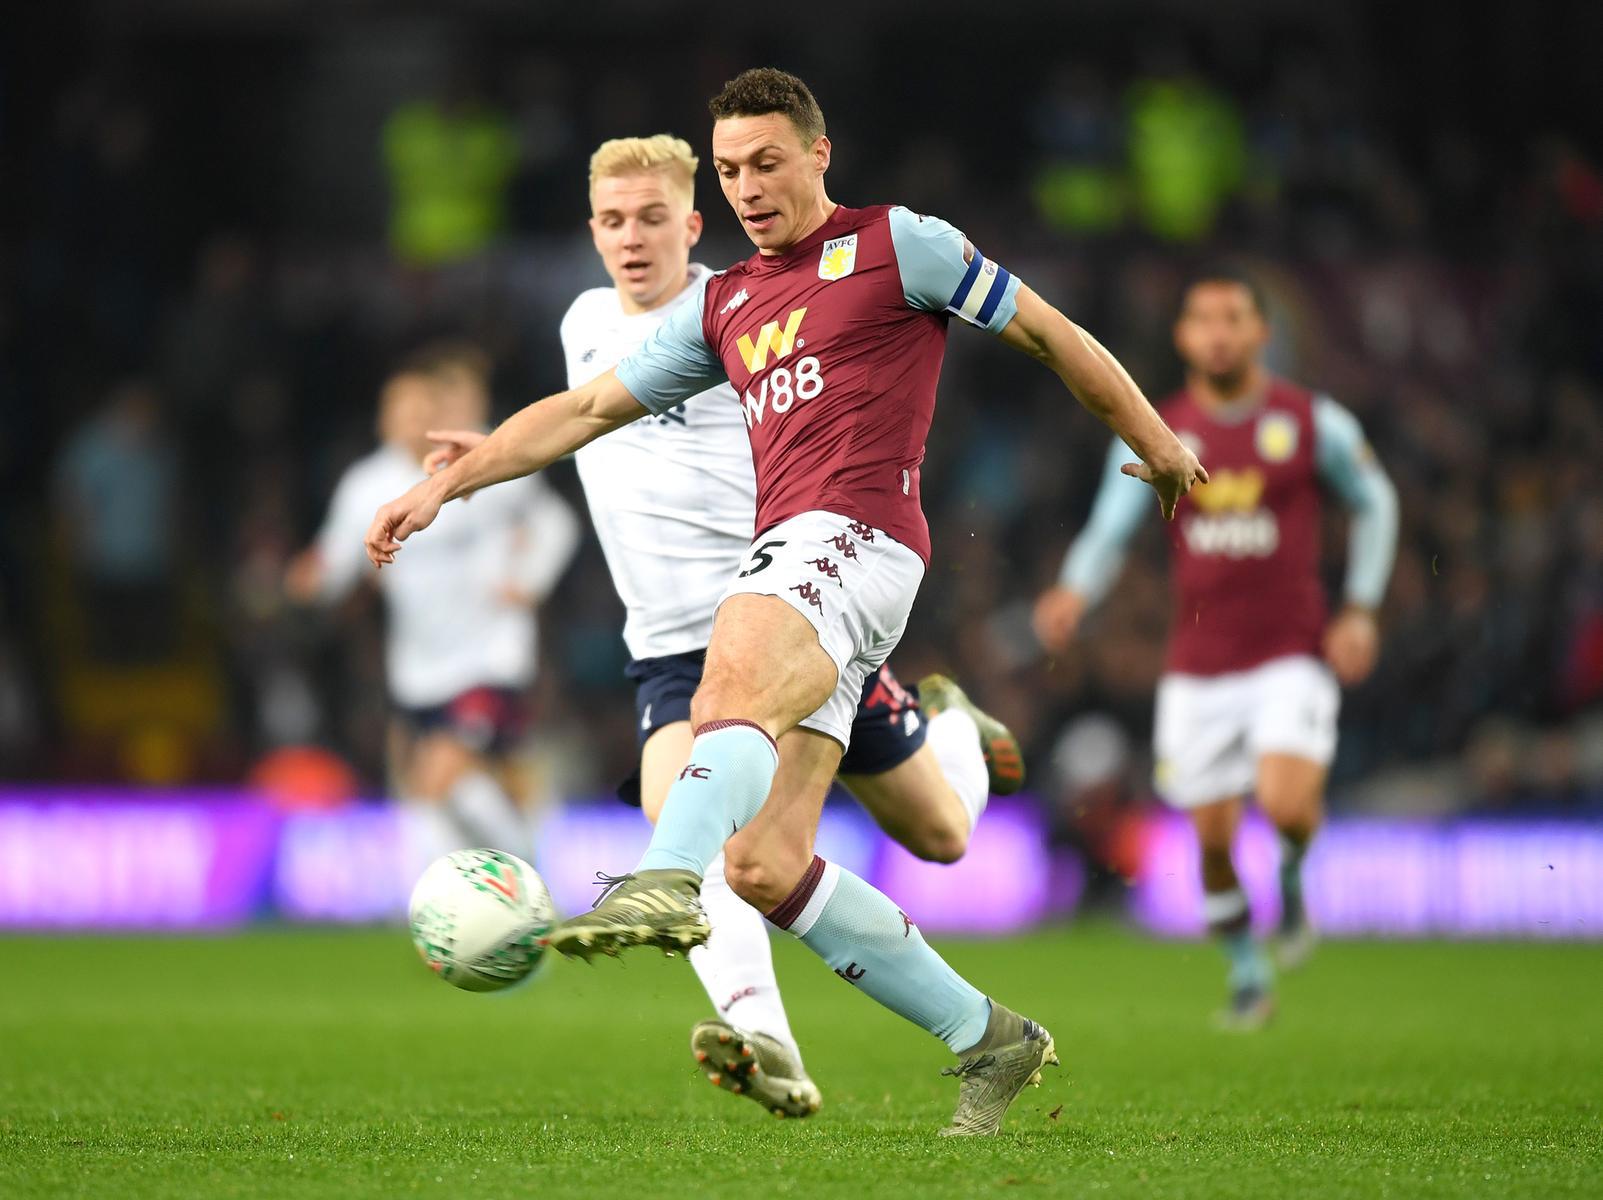 Defender helped Aston Villa win promotion to the Premier League last term, but has made just two FA Cup appearances since. Welsh international has had two big money moves to both Villa and West Brom in his career.